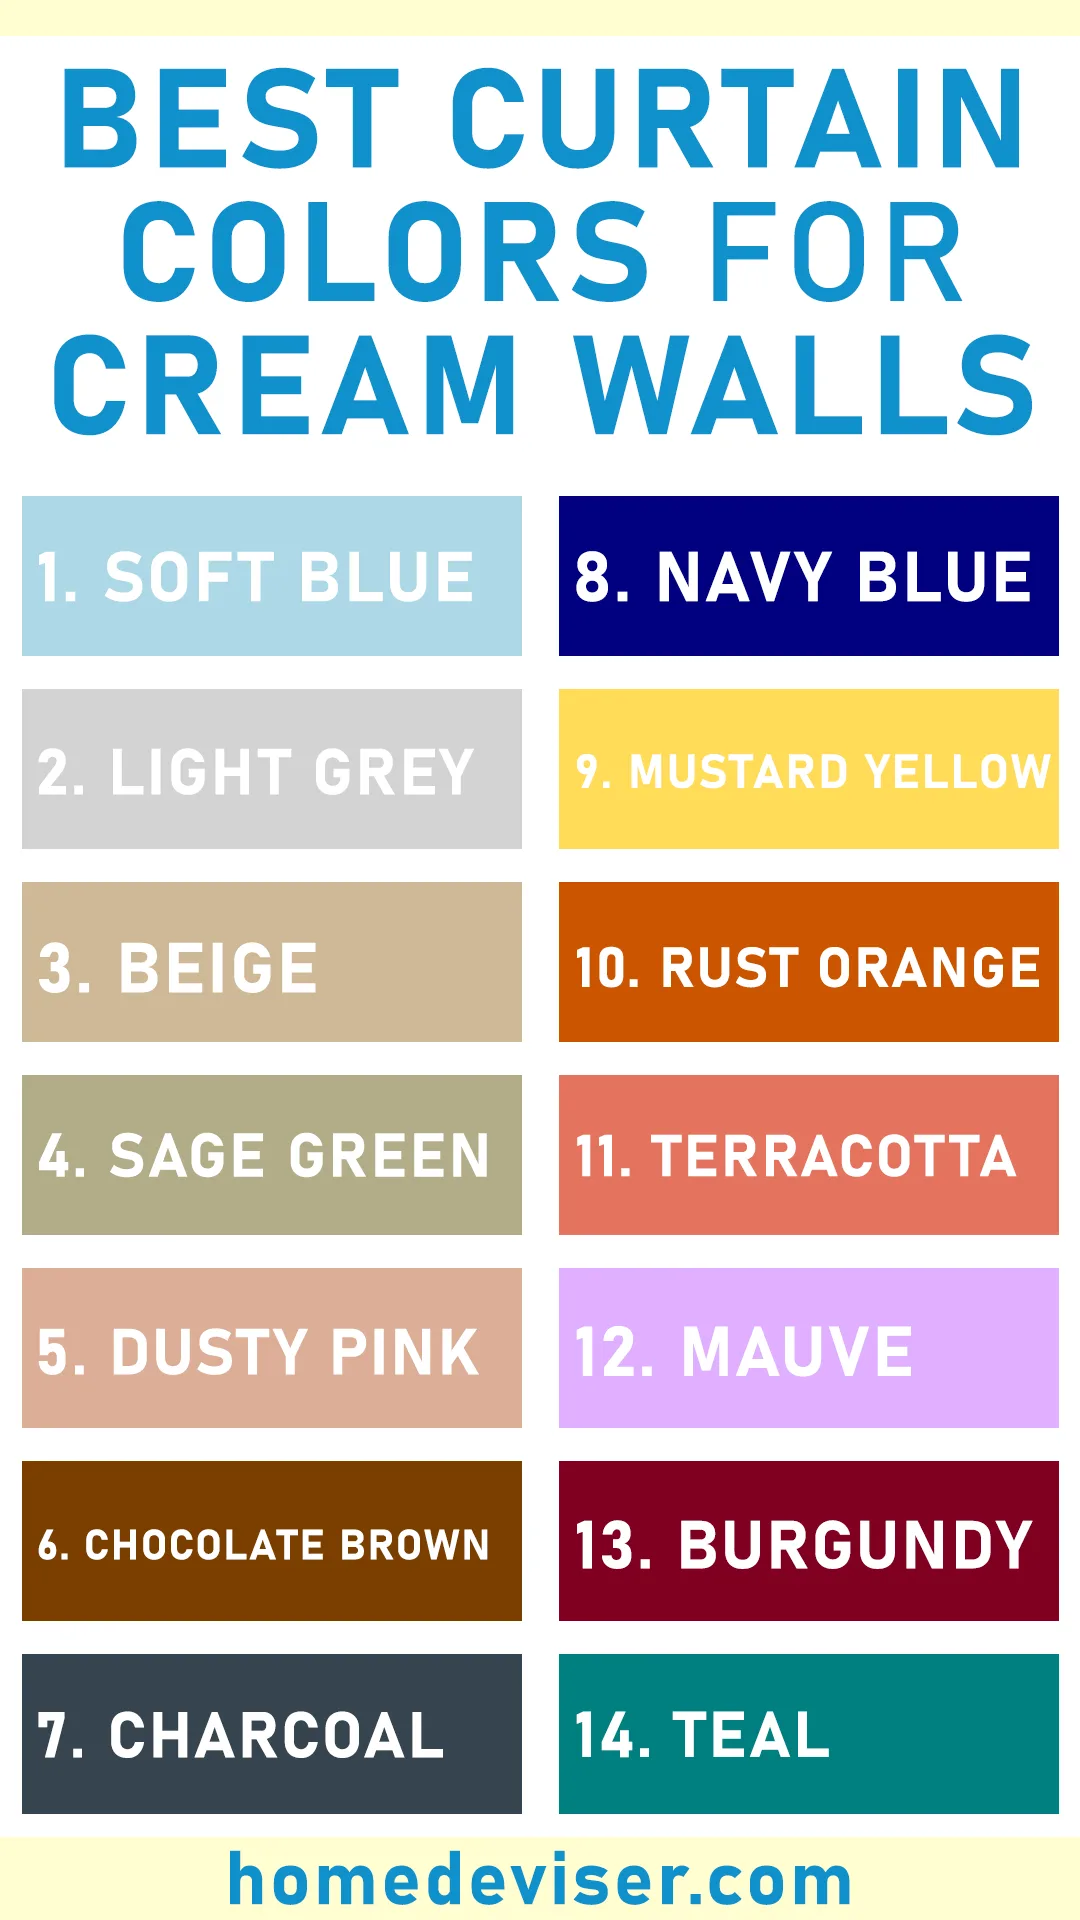 14 Best curtain colors for cream walls